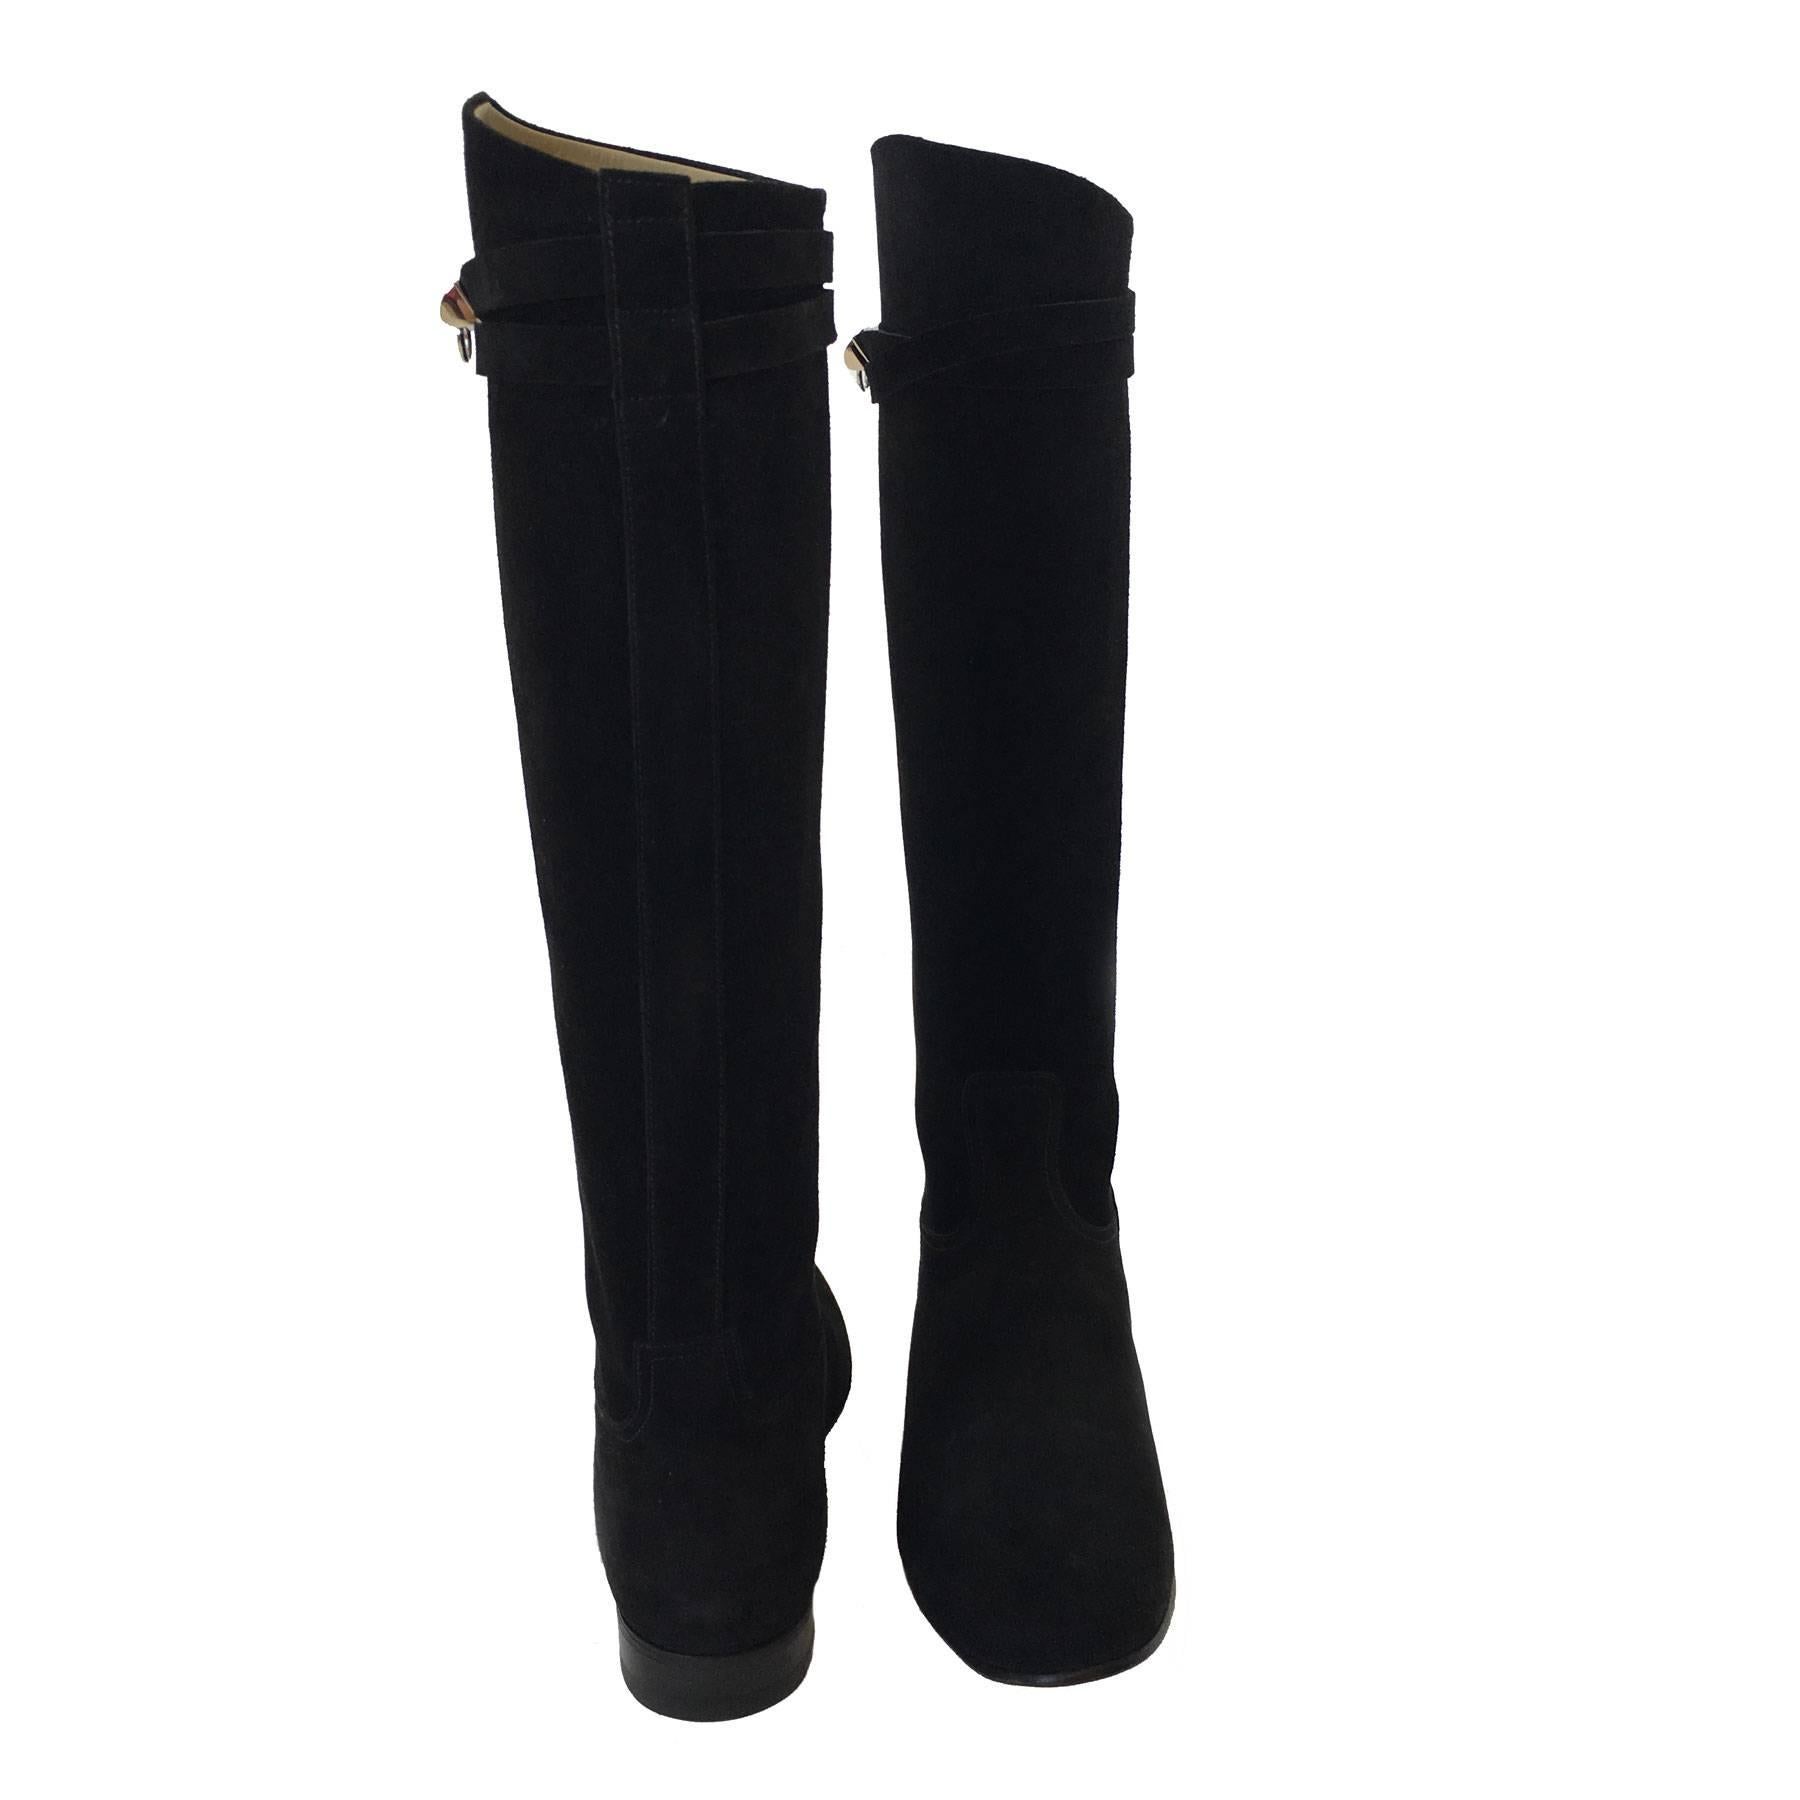 HERMES Riding Boots in Black Suede Size 36.5EU 2